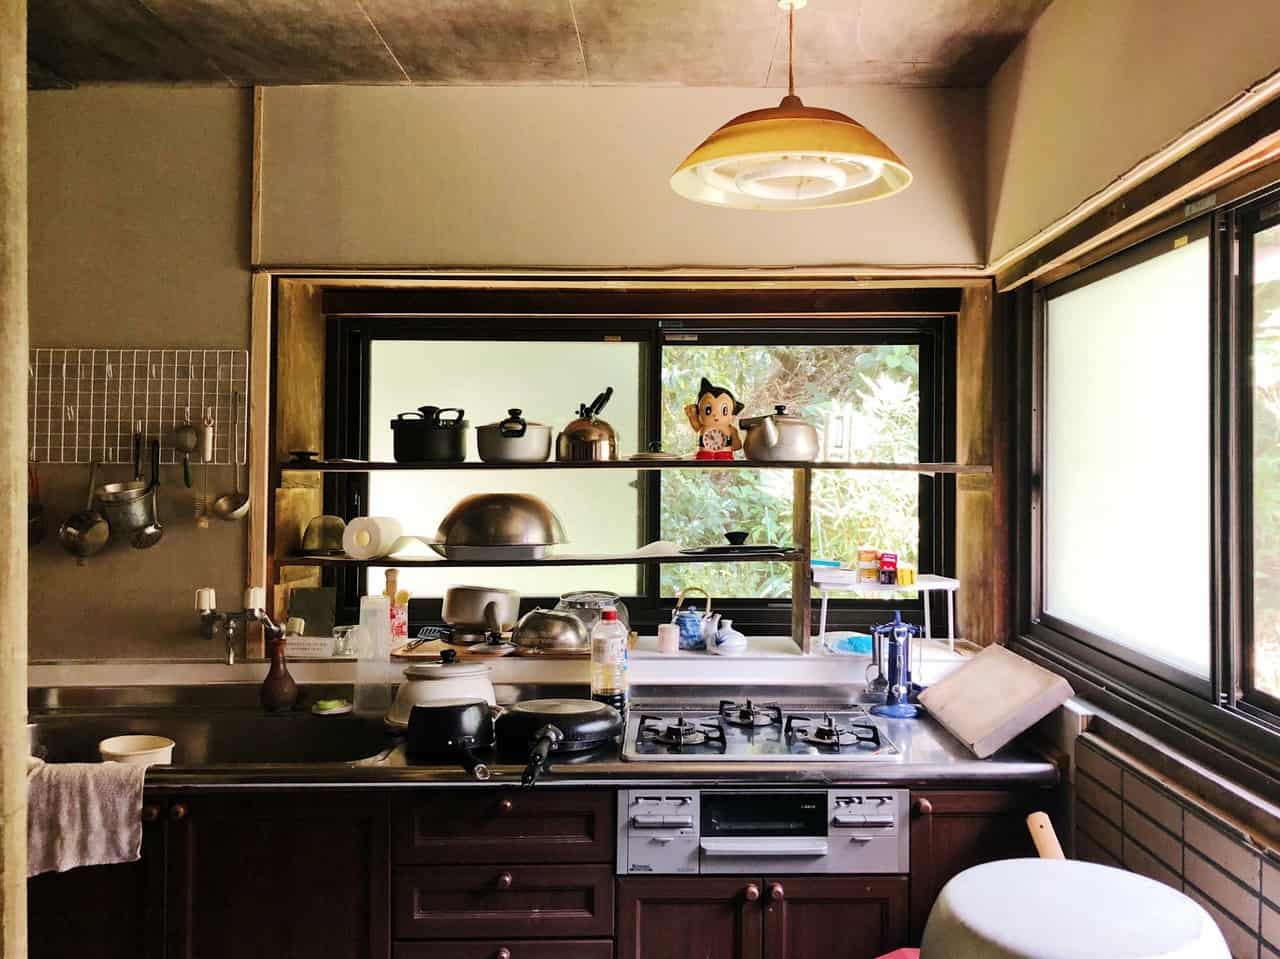 The owner’s private kitchen
